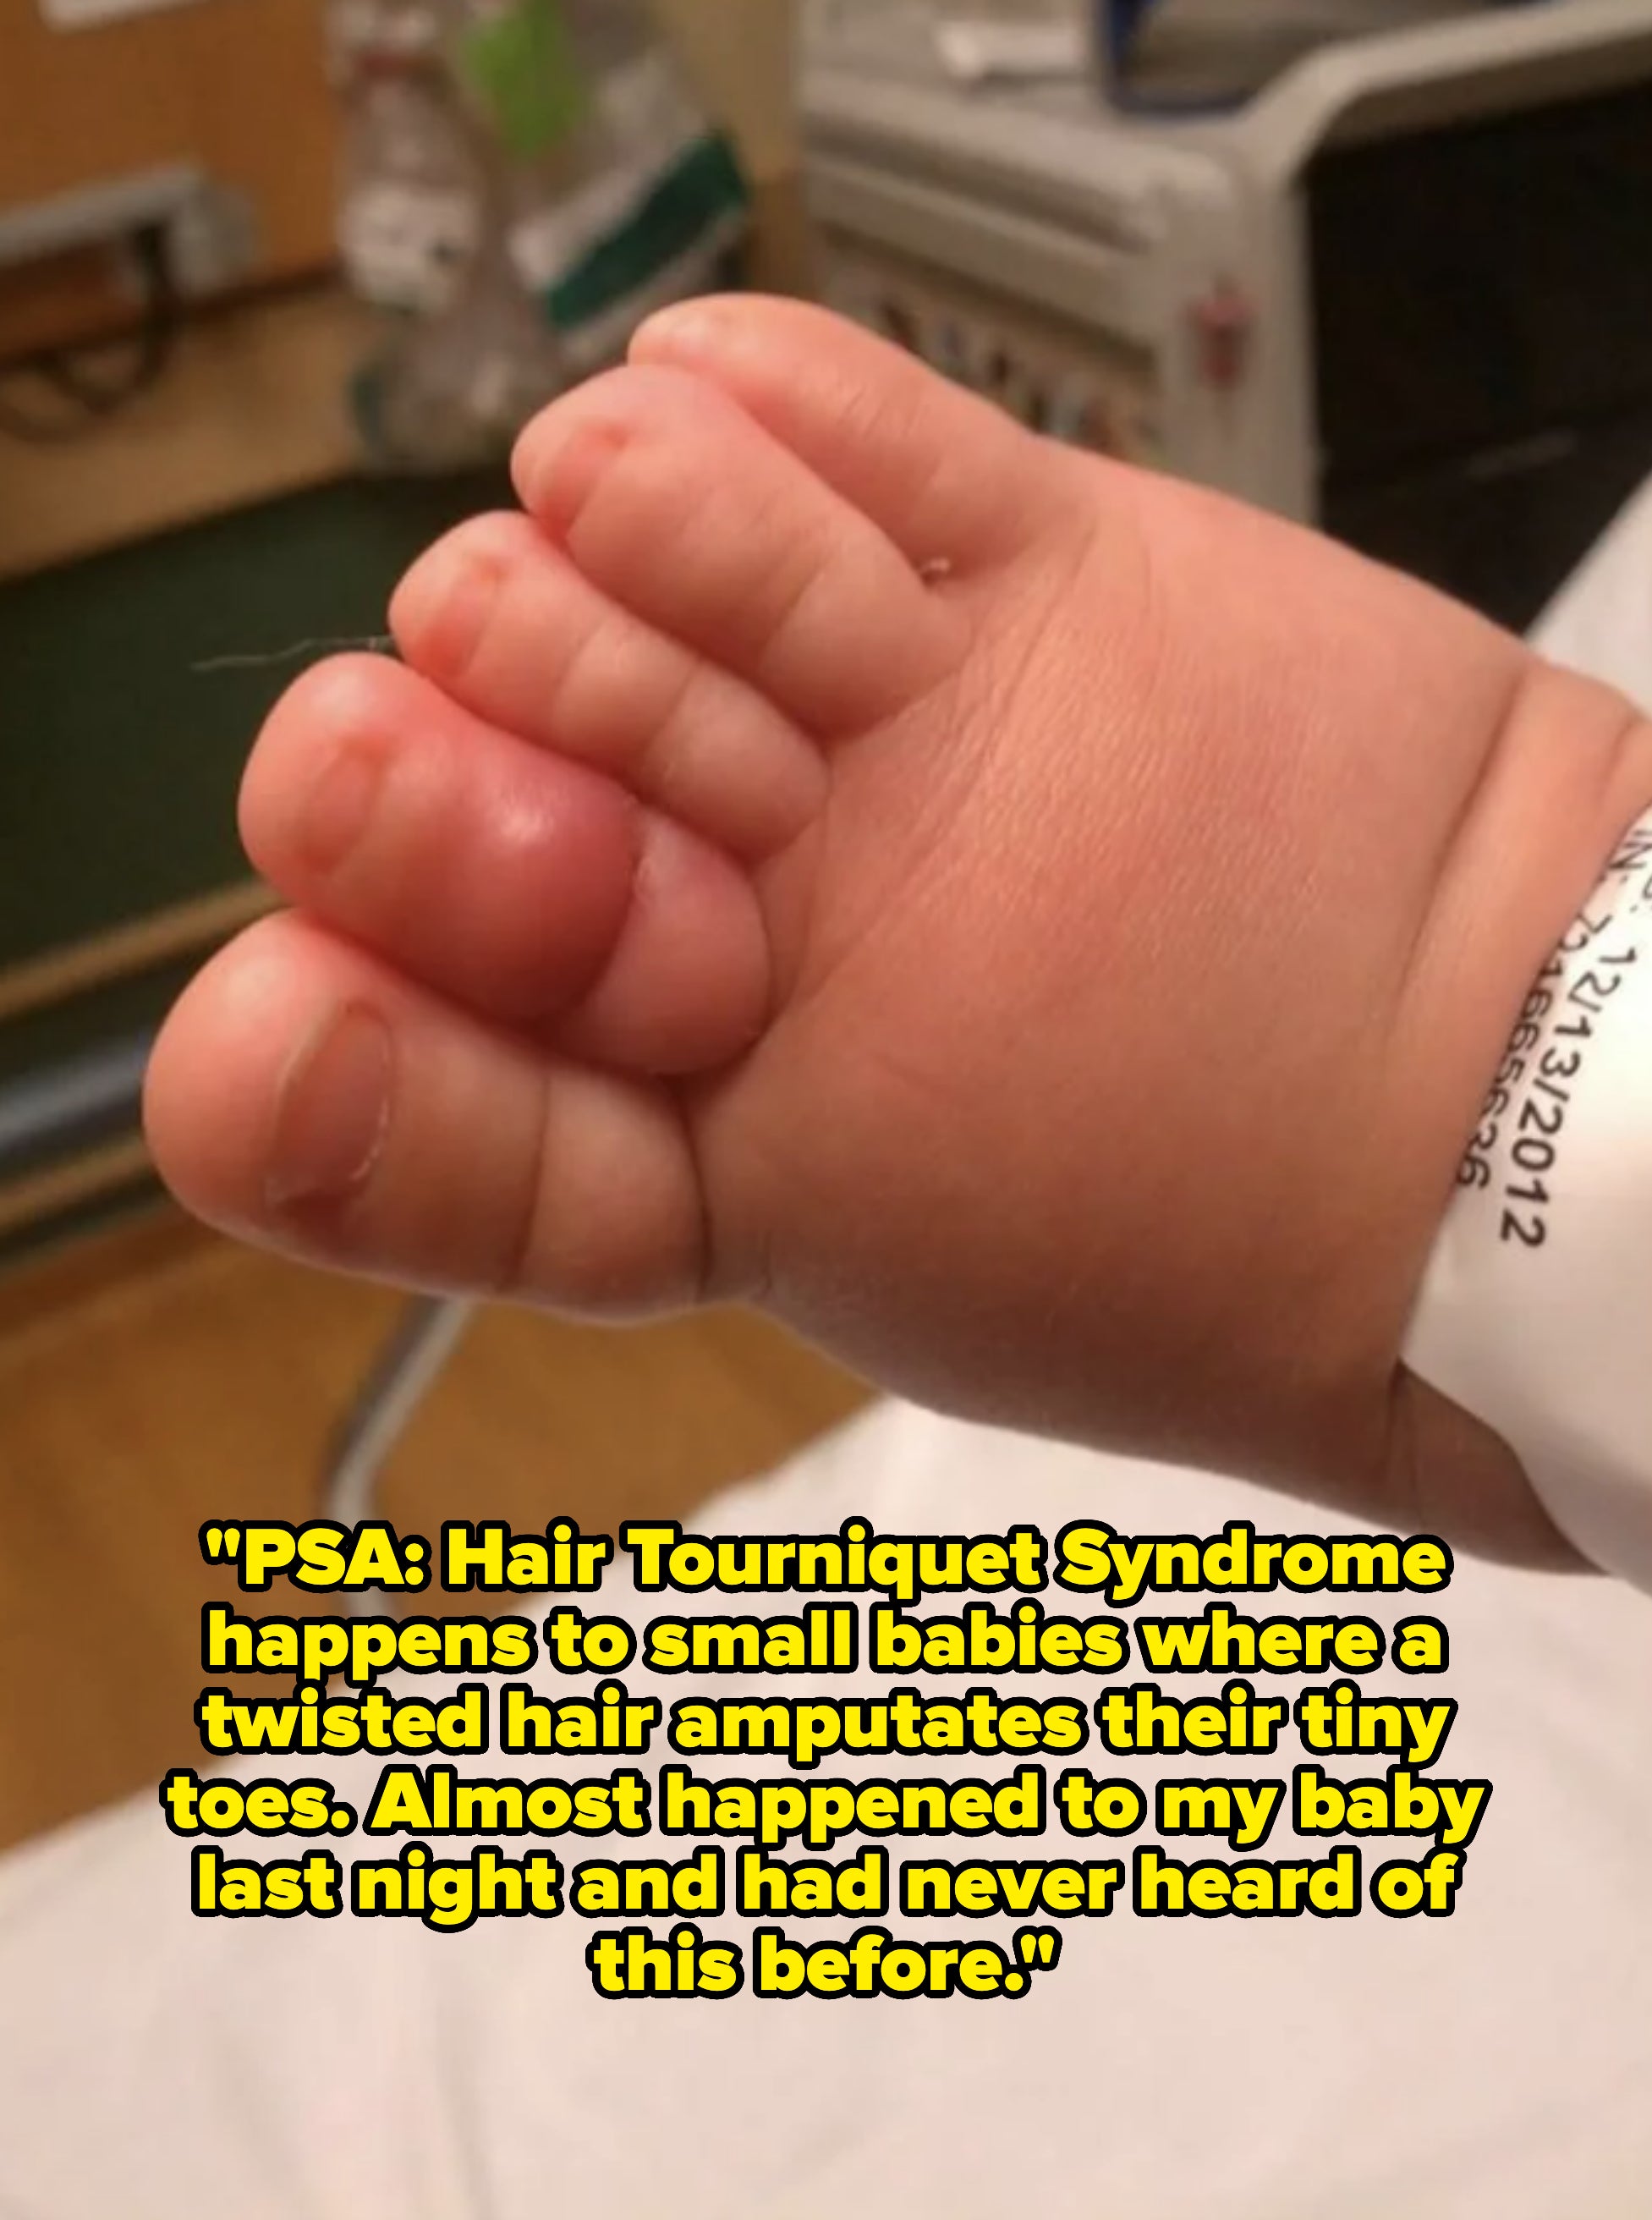 Close-up of a baby&#x27;s foot held gently, hospital band visible on the wrist